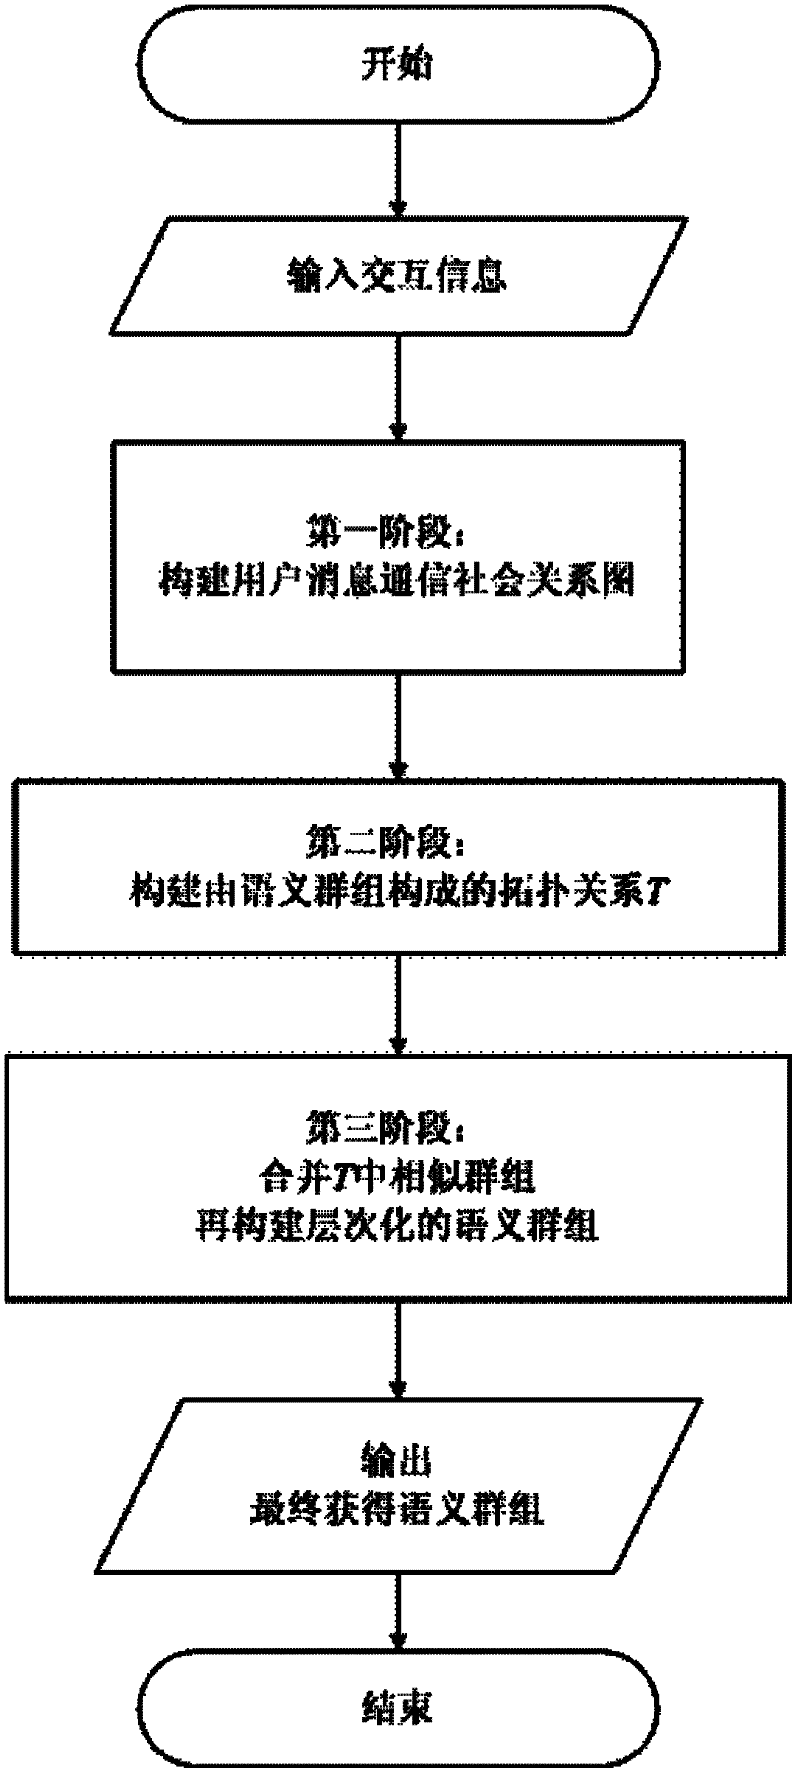 Contact semantic grouping method for network message communication